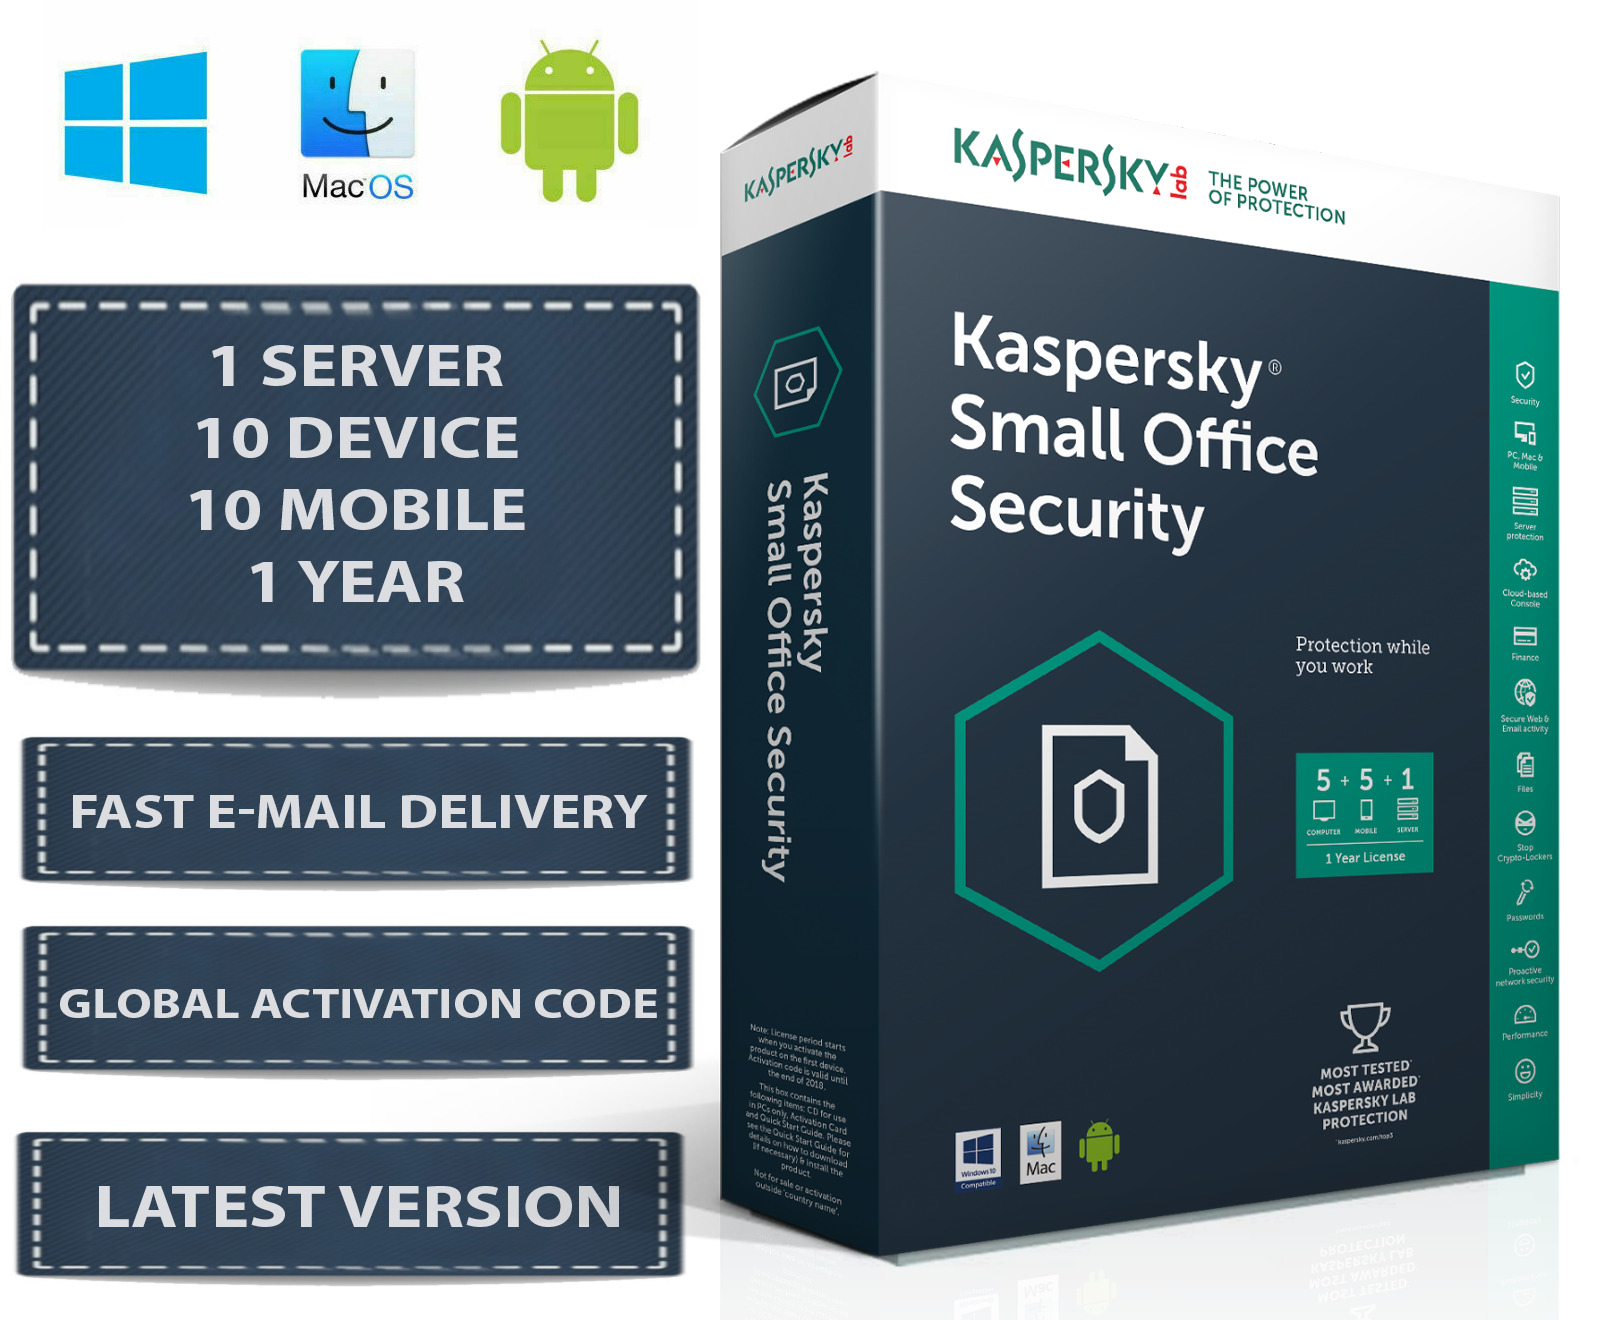 Kaspersky Small Office Security V8 1 Server 10 DEVICE + 10 MOBILE + 1 YEAR